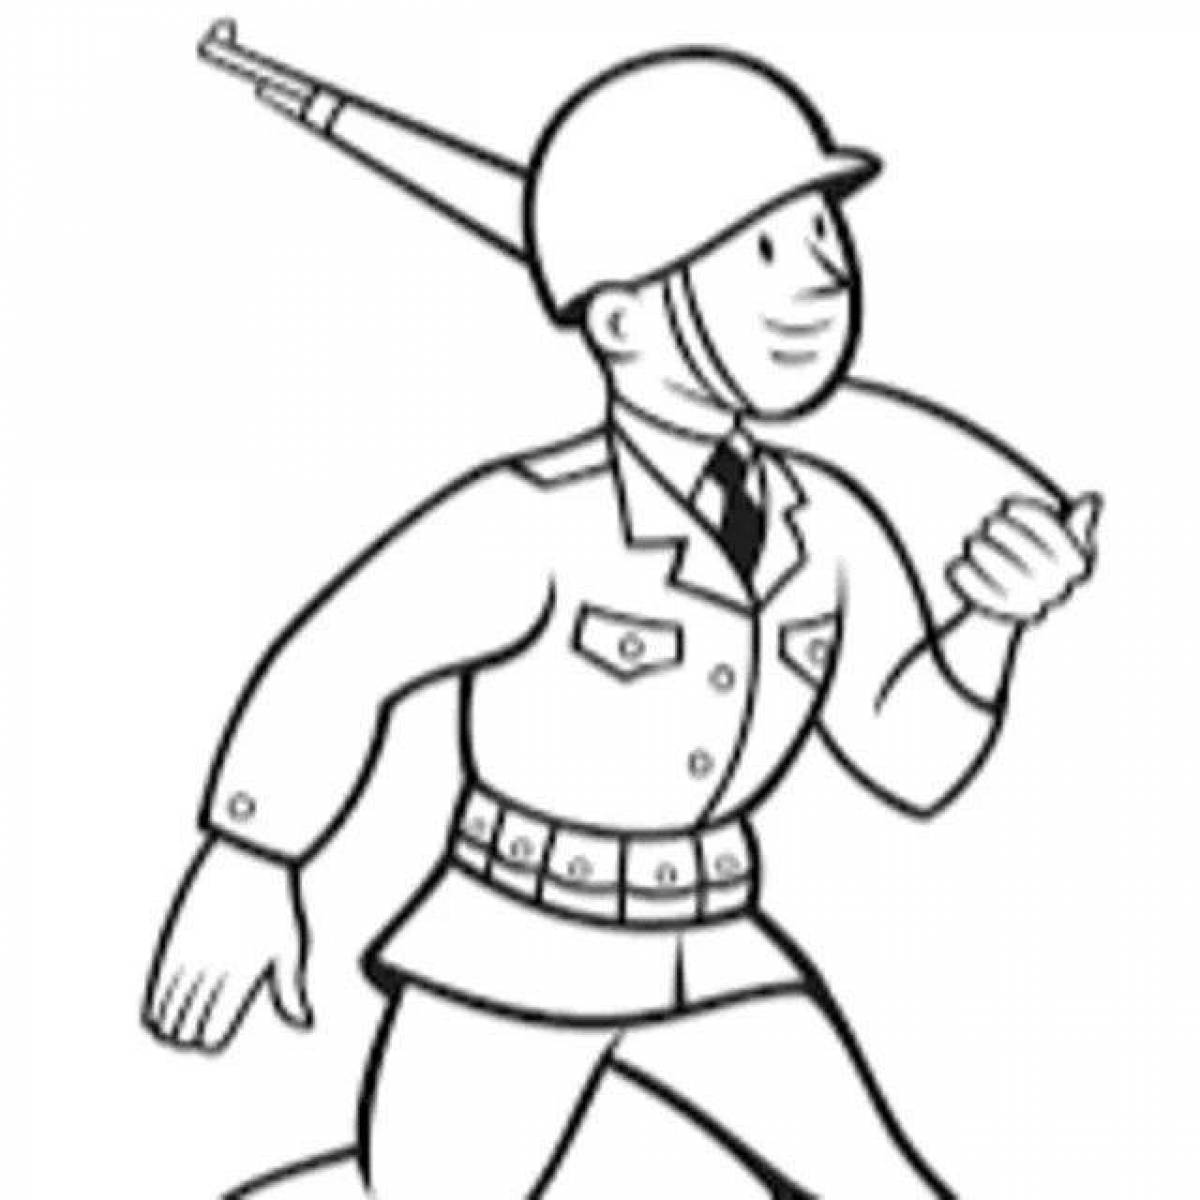 Gorgeous soldier on duty drawing